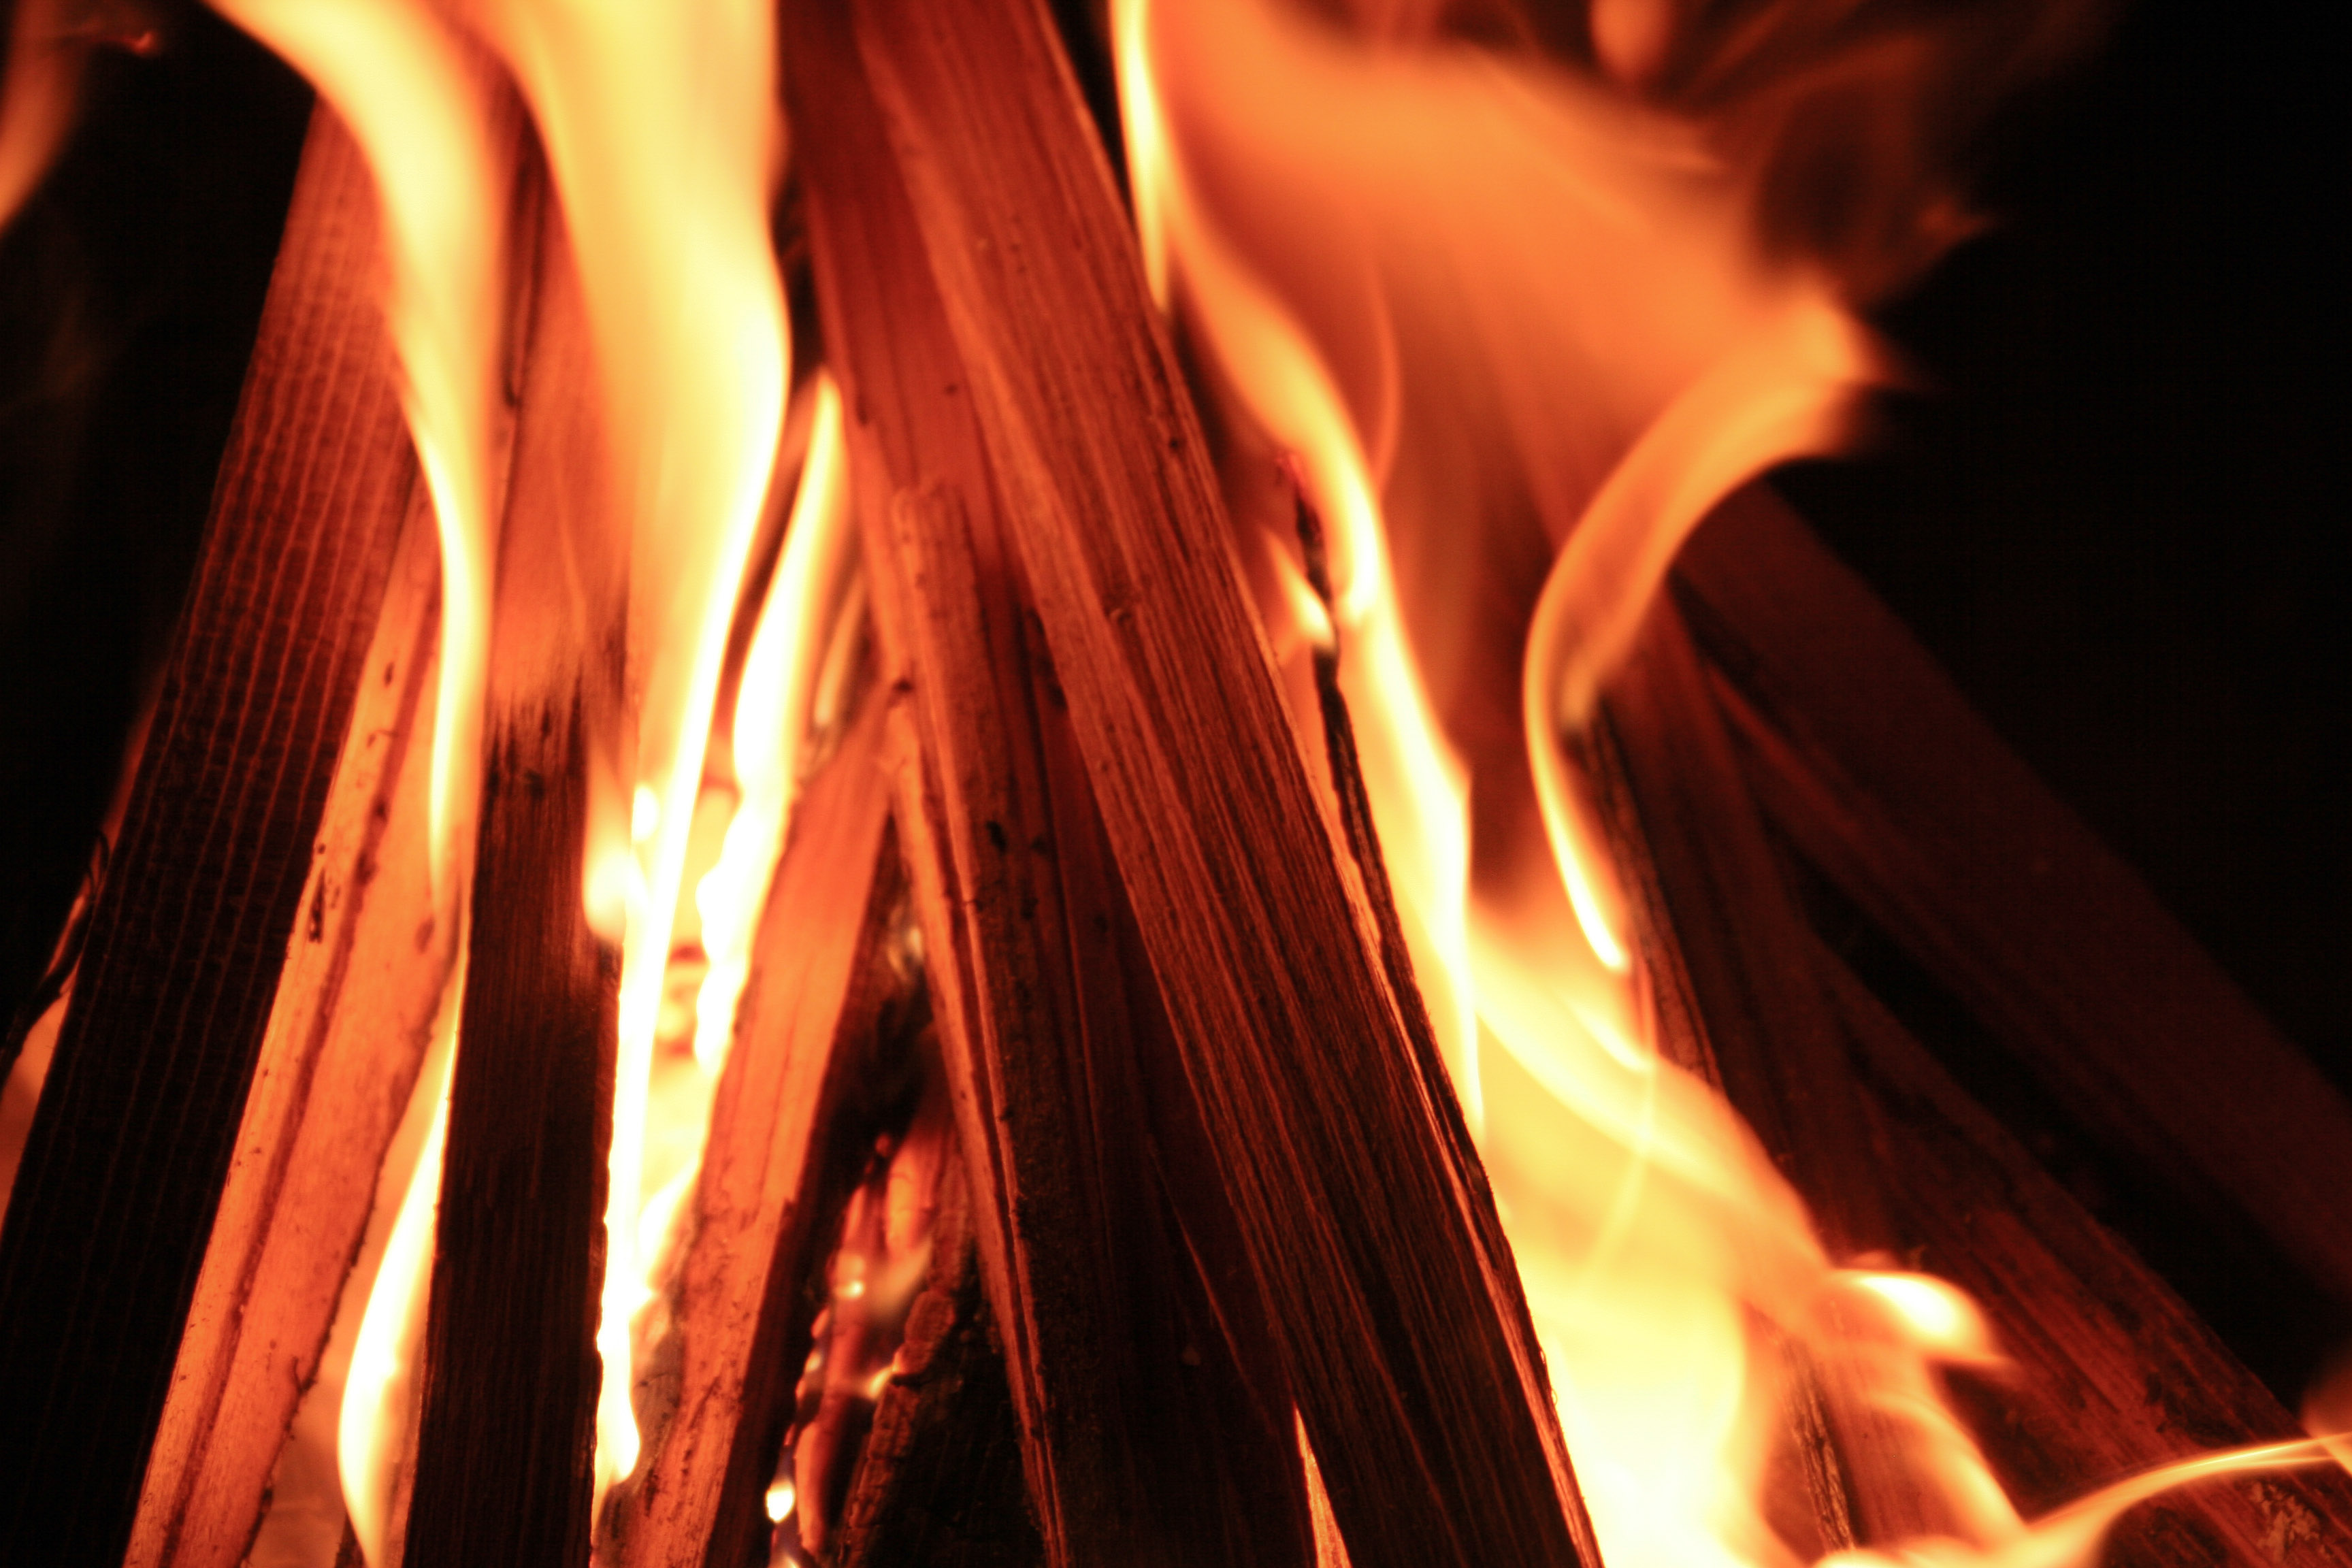 Fire With Wood Texture - HD Wallpaper 